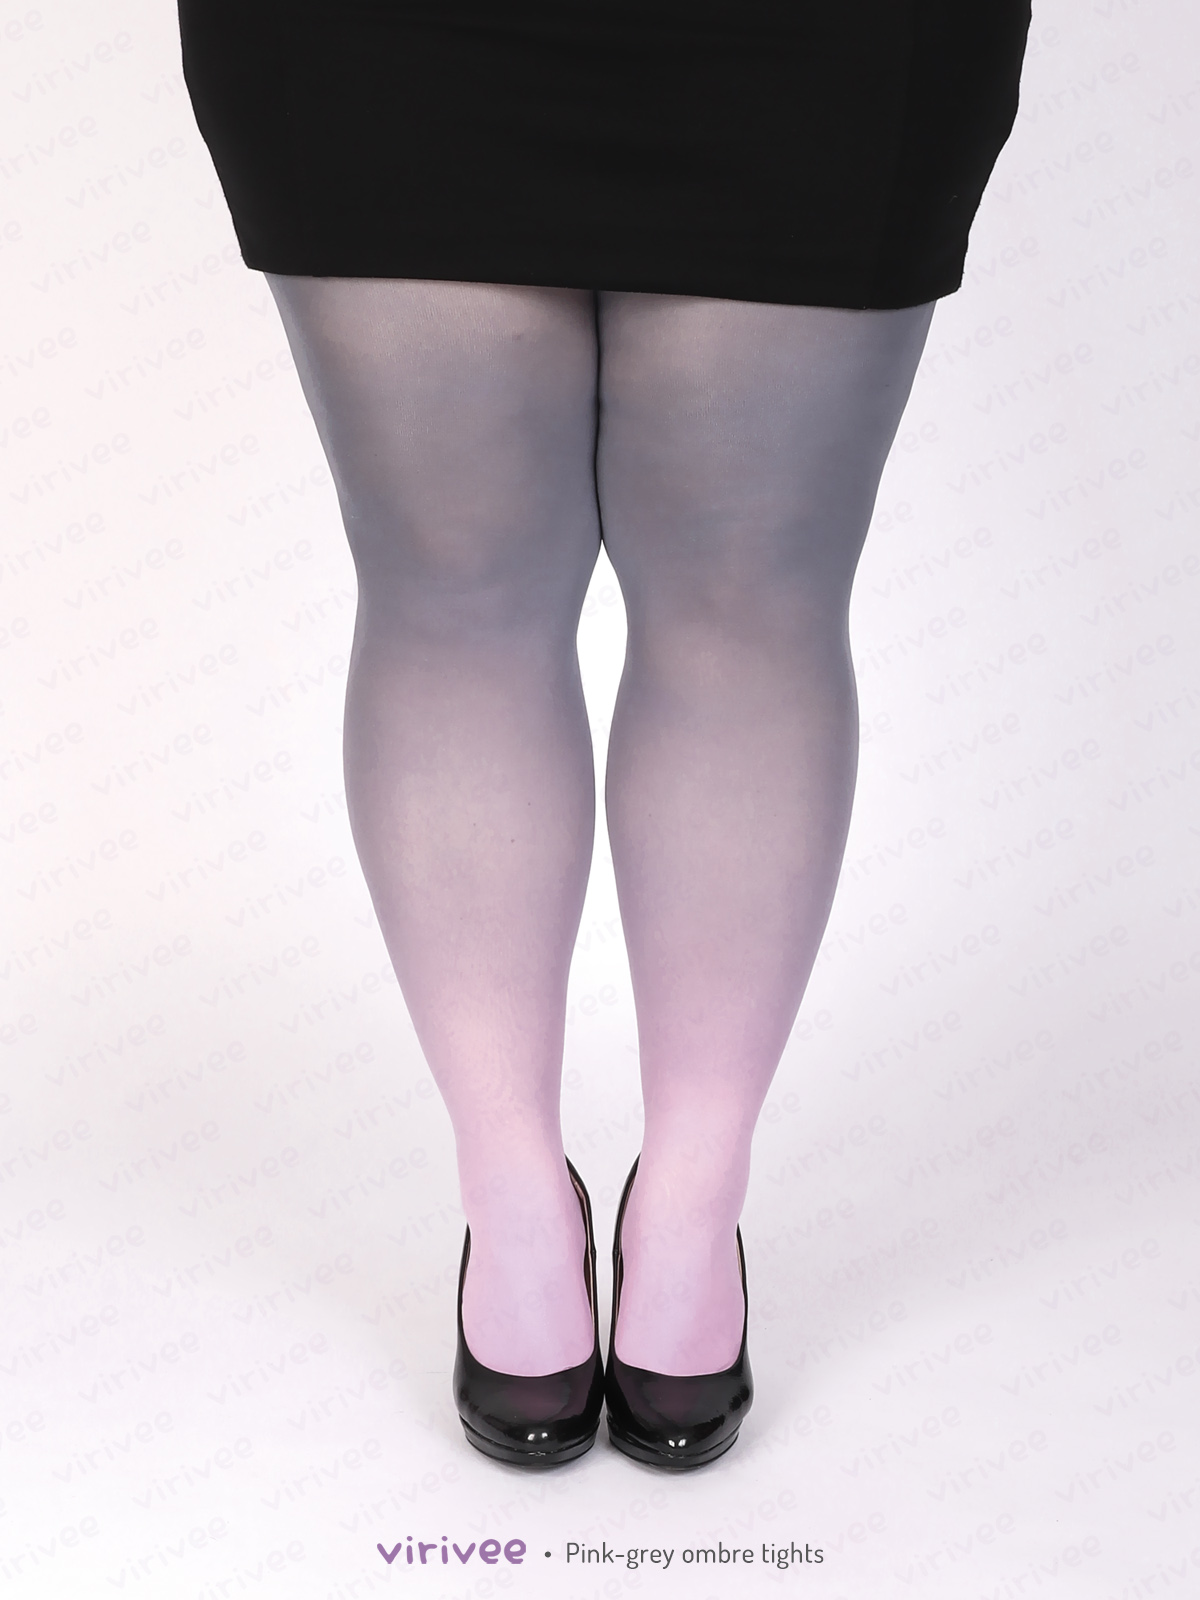 Plus size pink-grey ombre tights